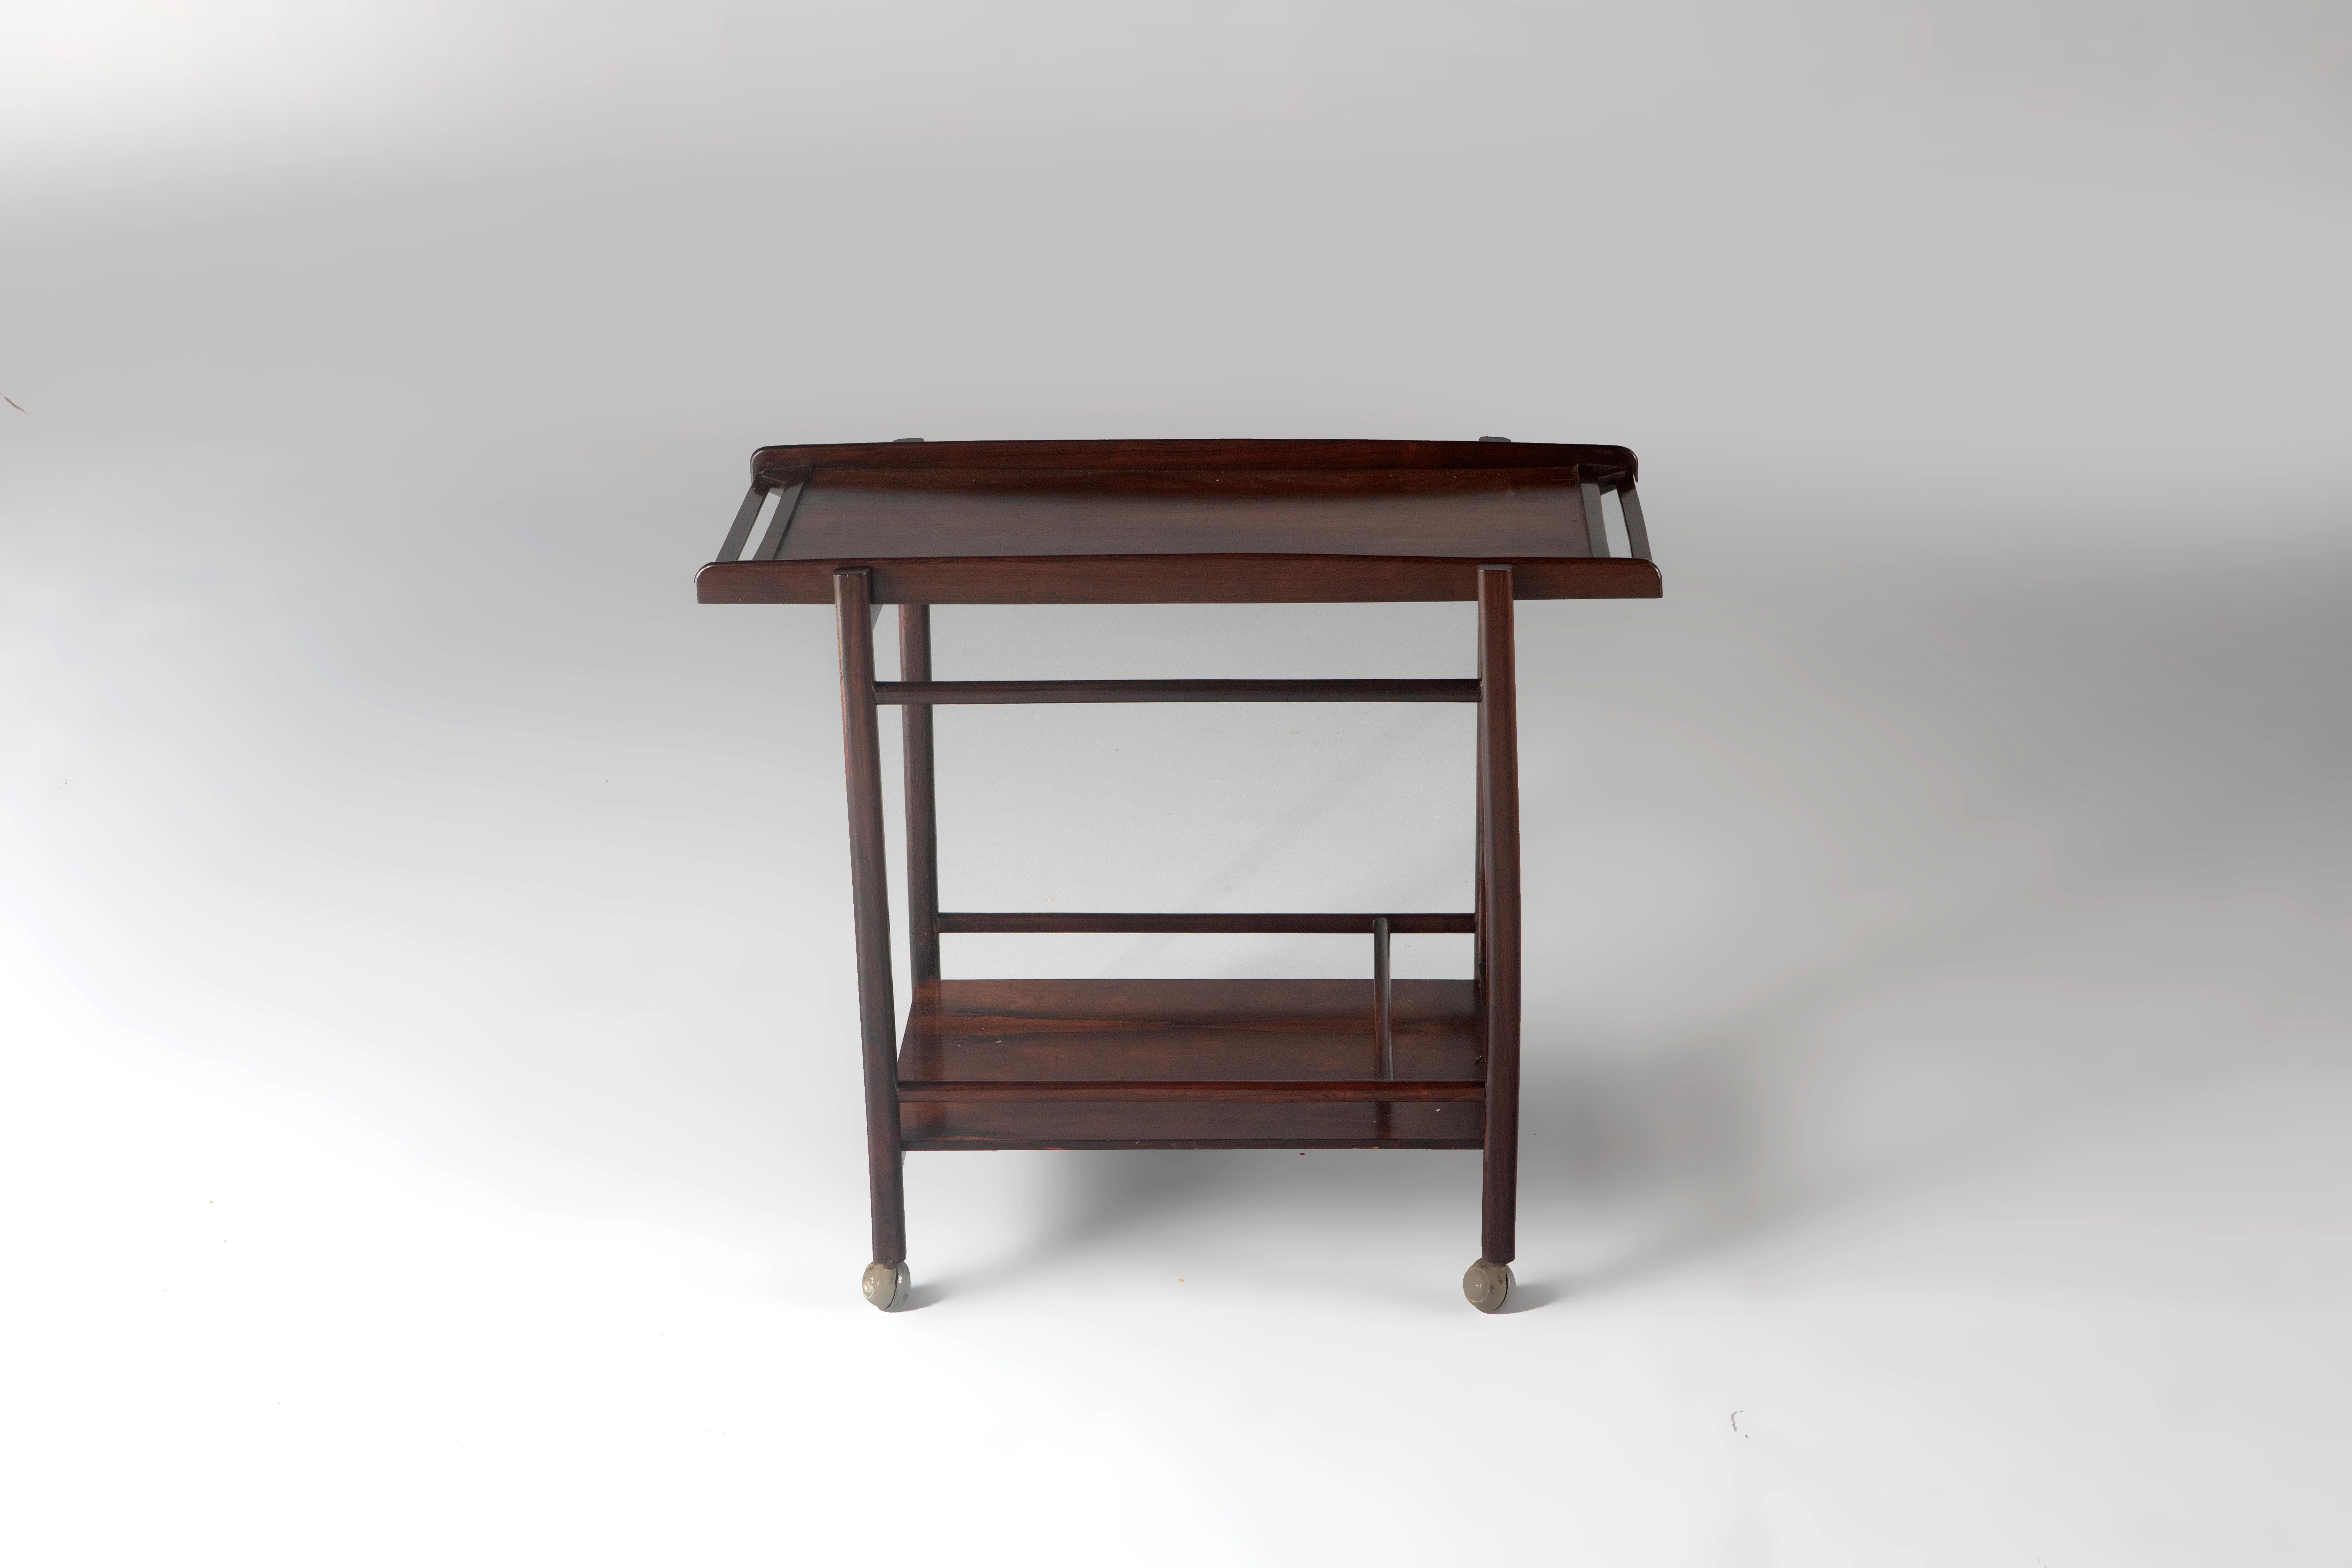 Mid-Century Modern Two-Story Tea Cart by Celina Decorações, Brazil, 1960s

This elegant two-tier tea cart was produced in the 1960s by Celina Decorações, in Brazil.
It has two levels, the top one being a removable tray with lined glass. It has